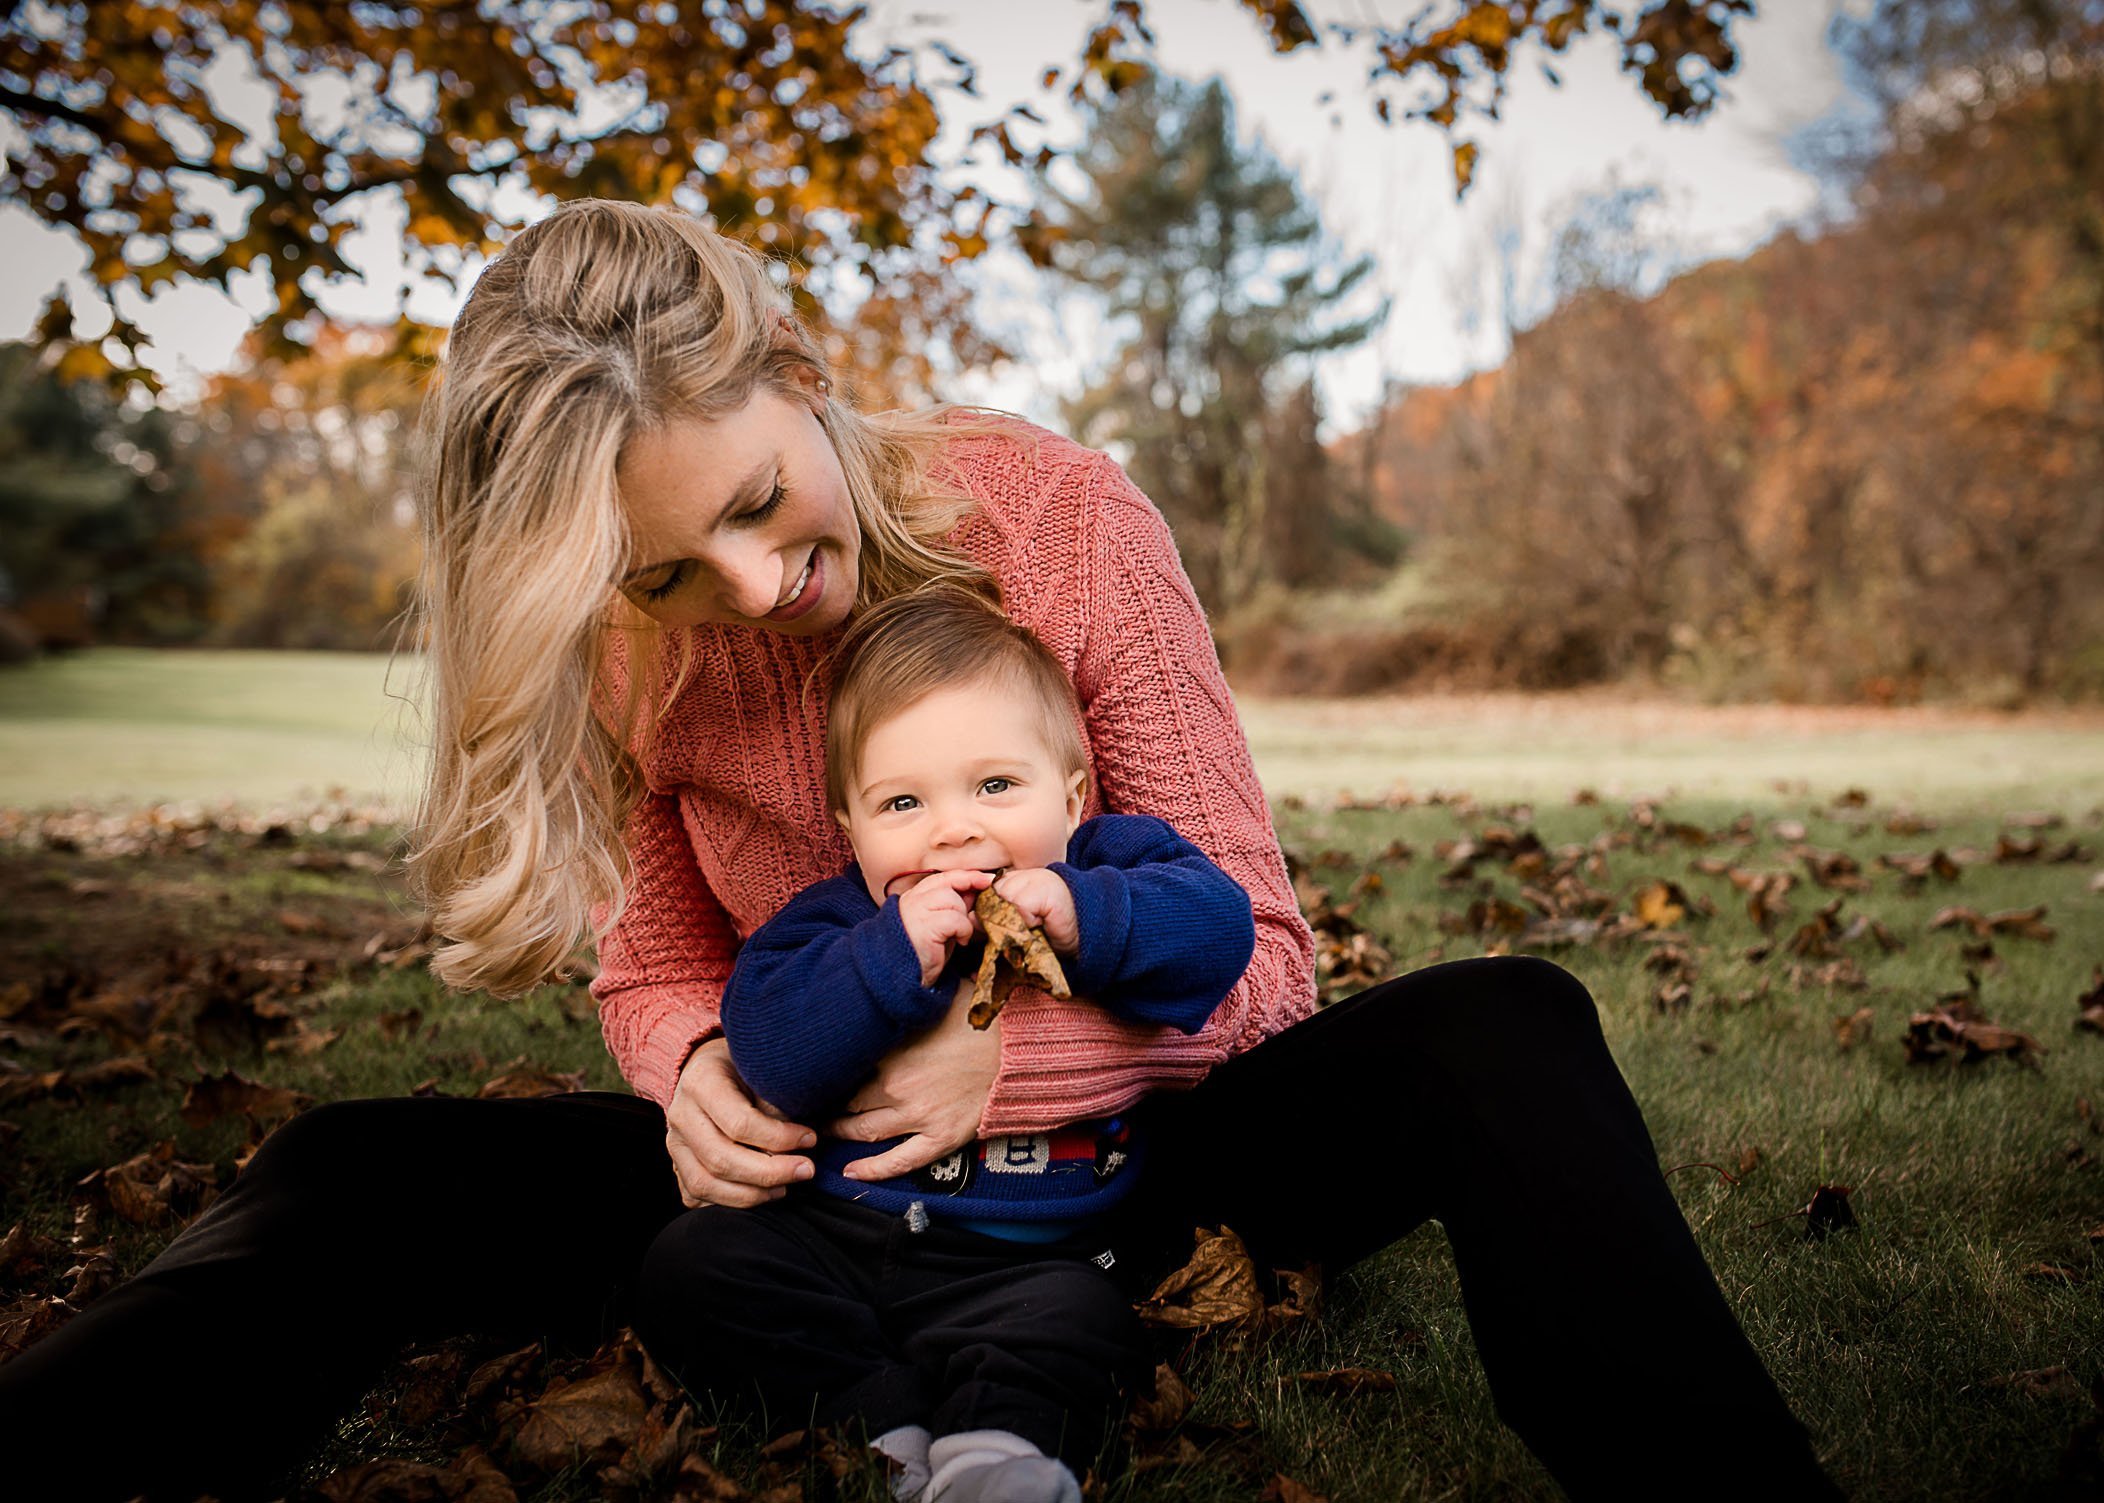 Mom playing with baby boy outside in fall leaves One Big Happy Photo